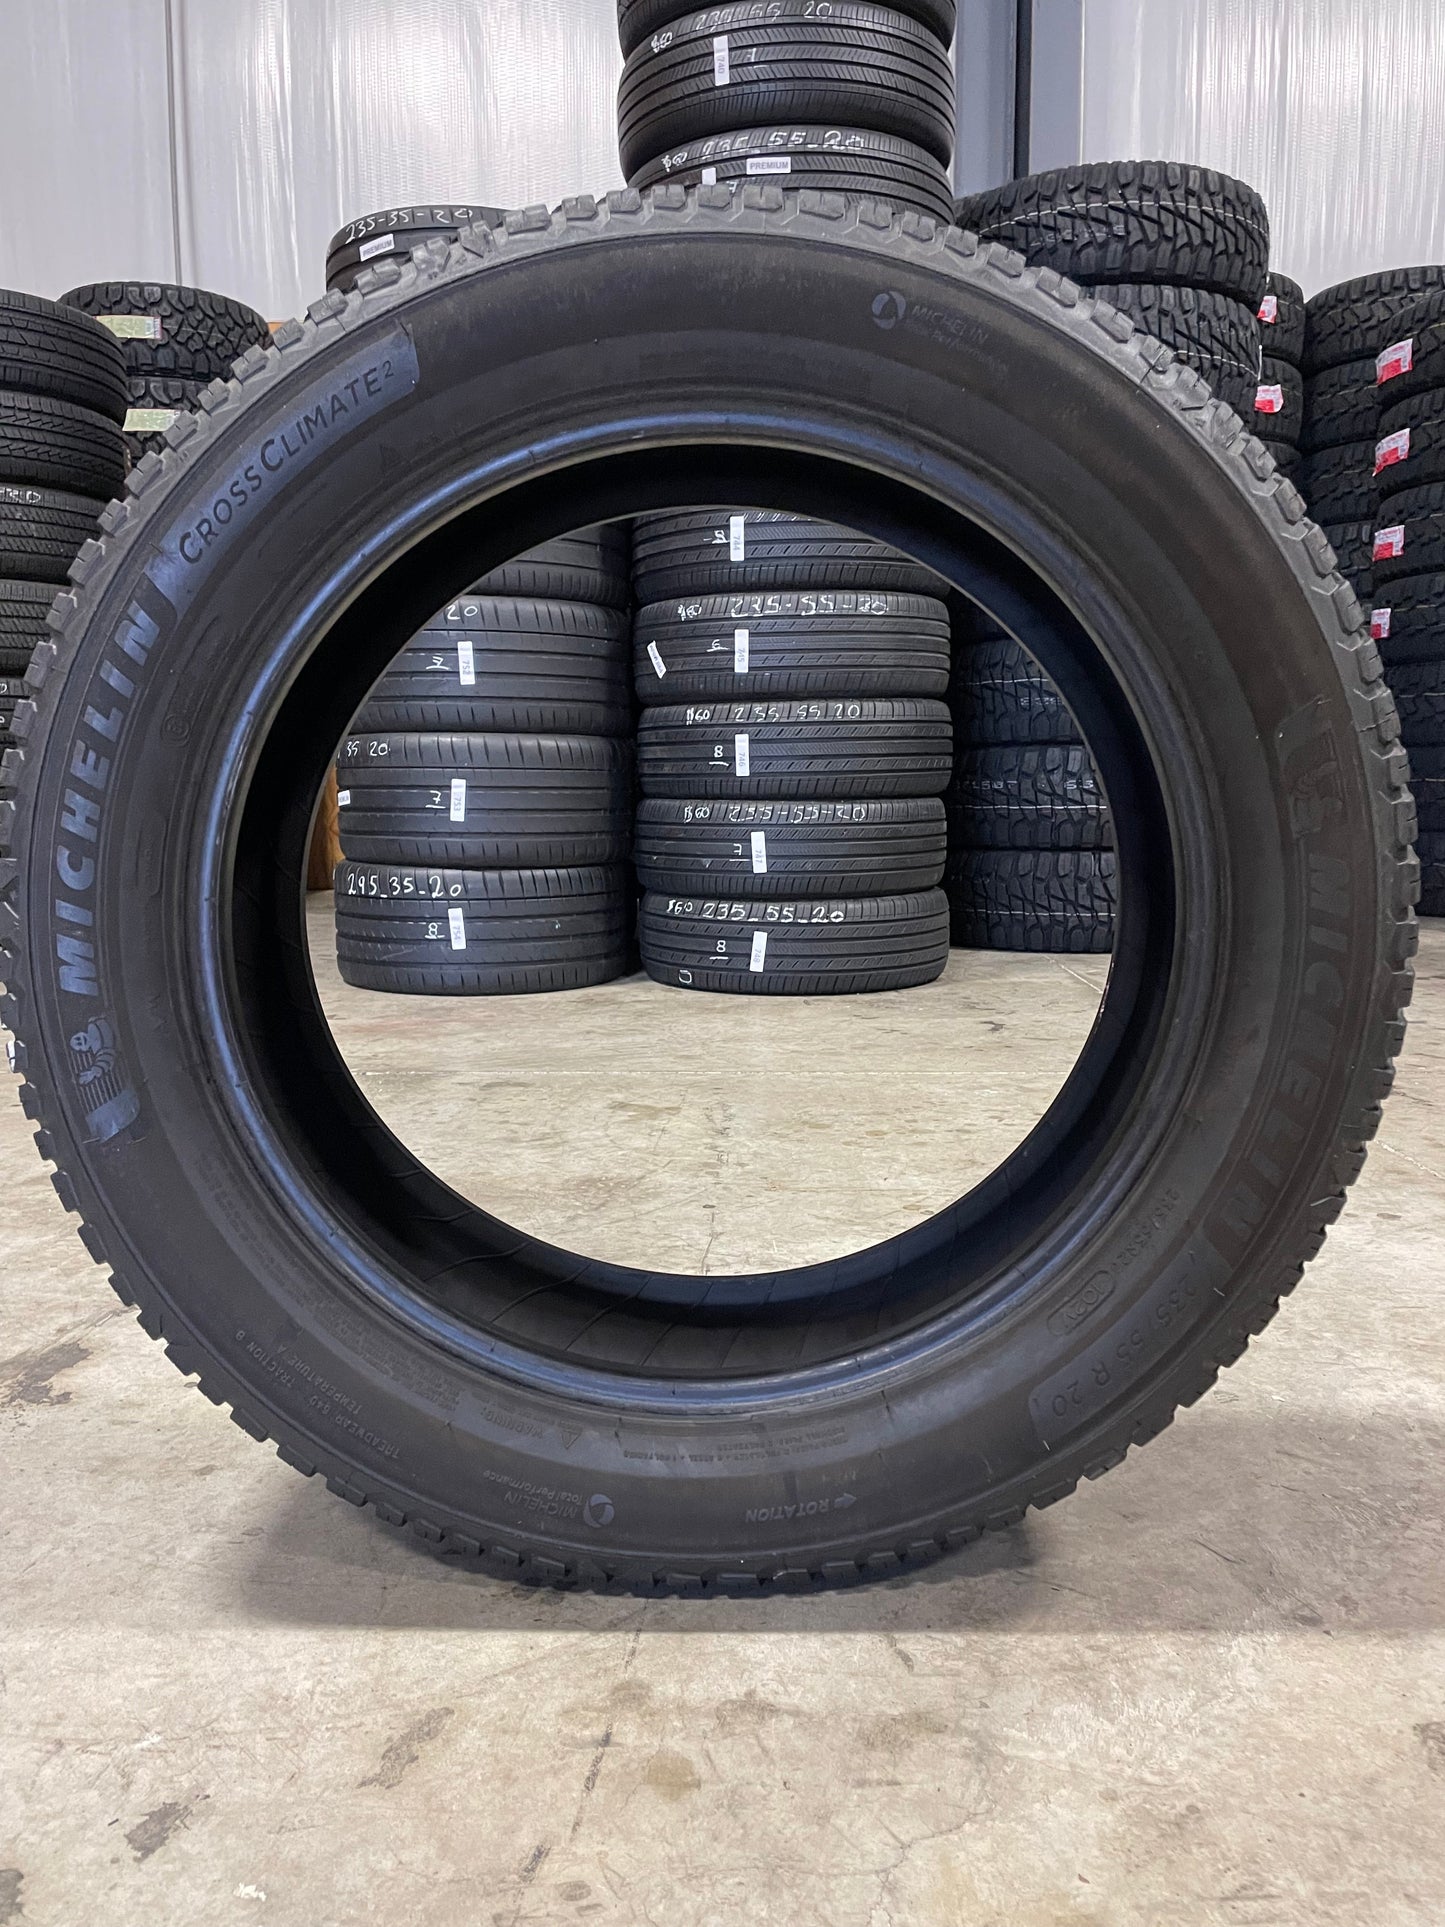 SET OF 2 235/55R20 Michelin Cross climate 2 102 V SL - Premium Used Tires